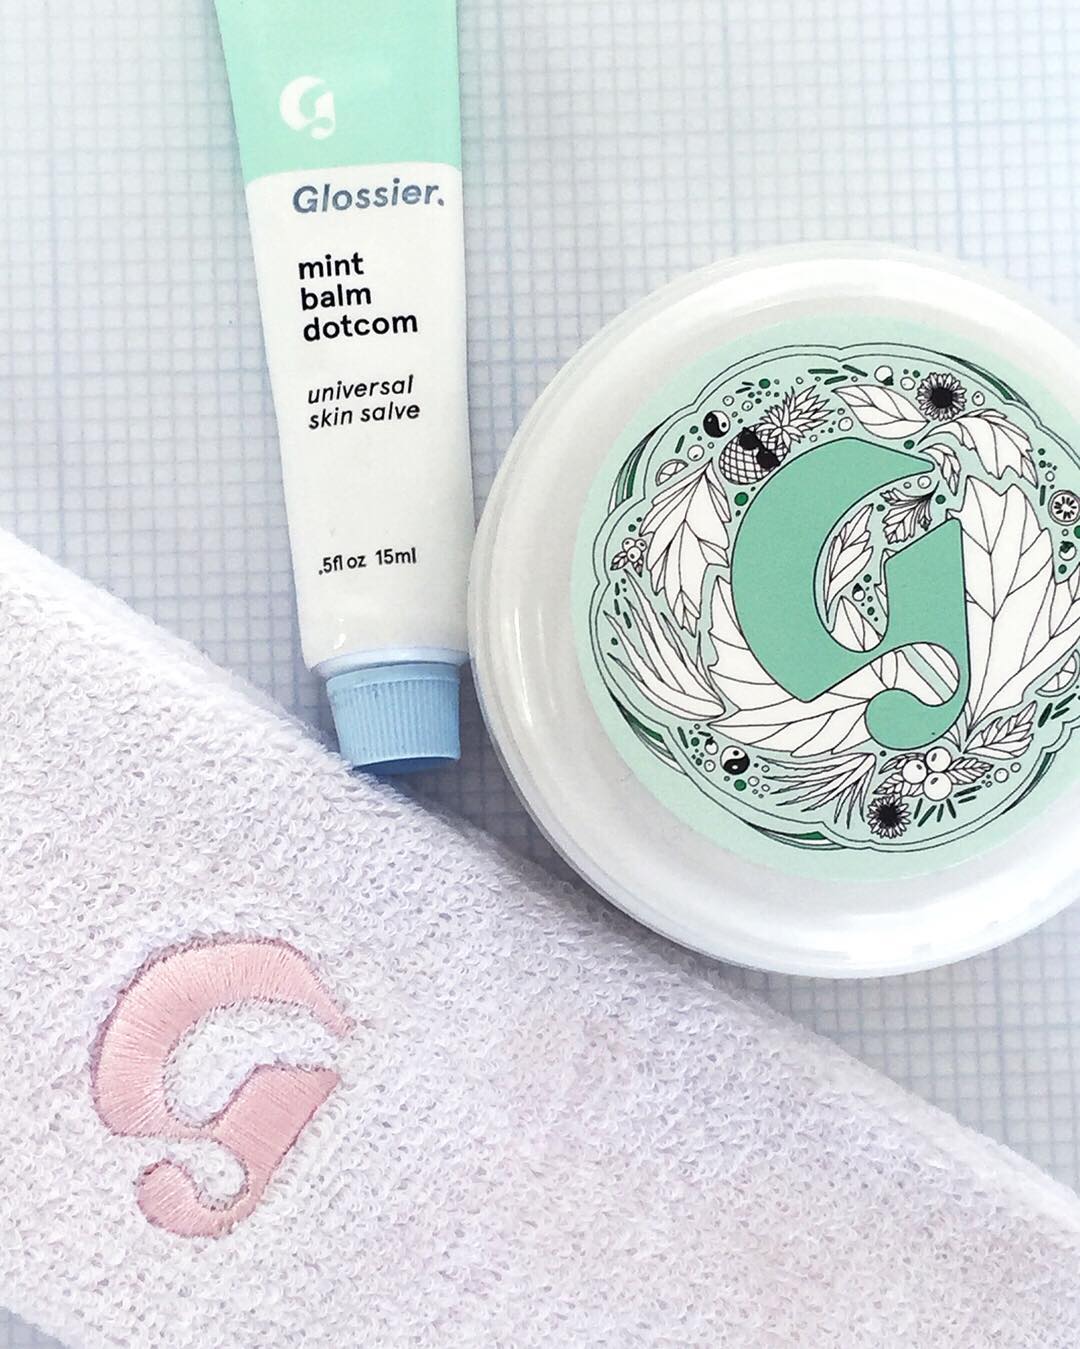 Glossier Emily Weiss 2